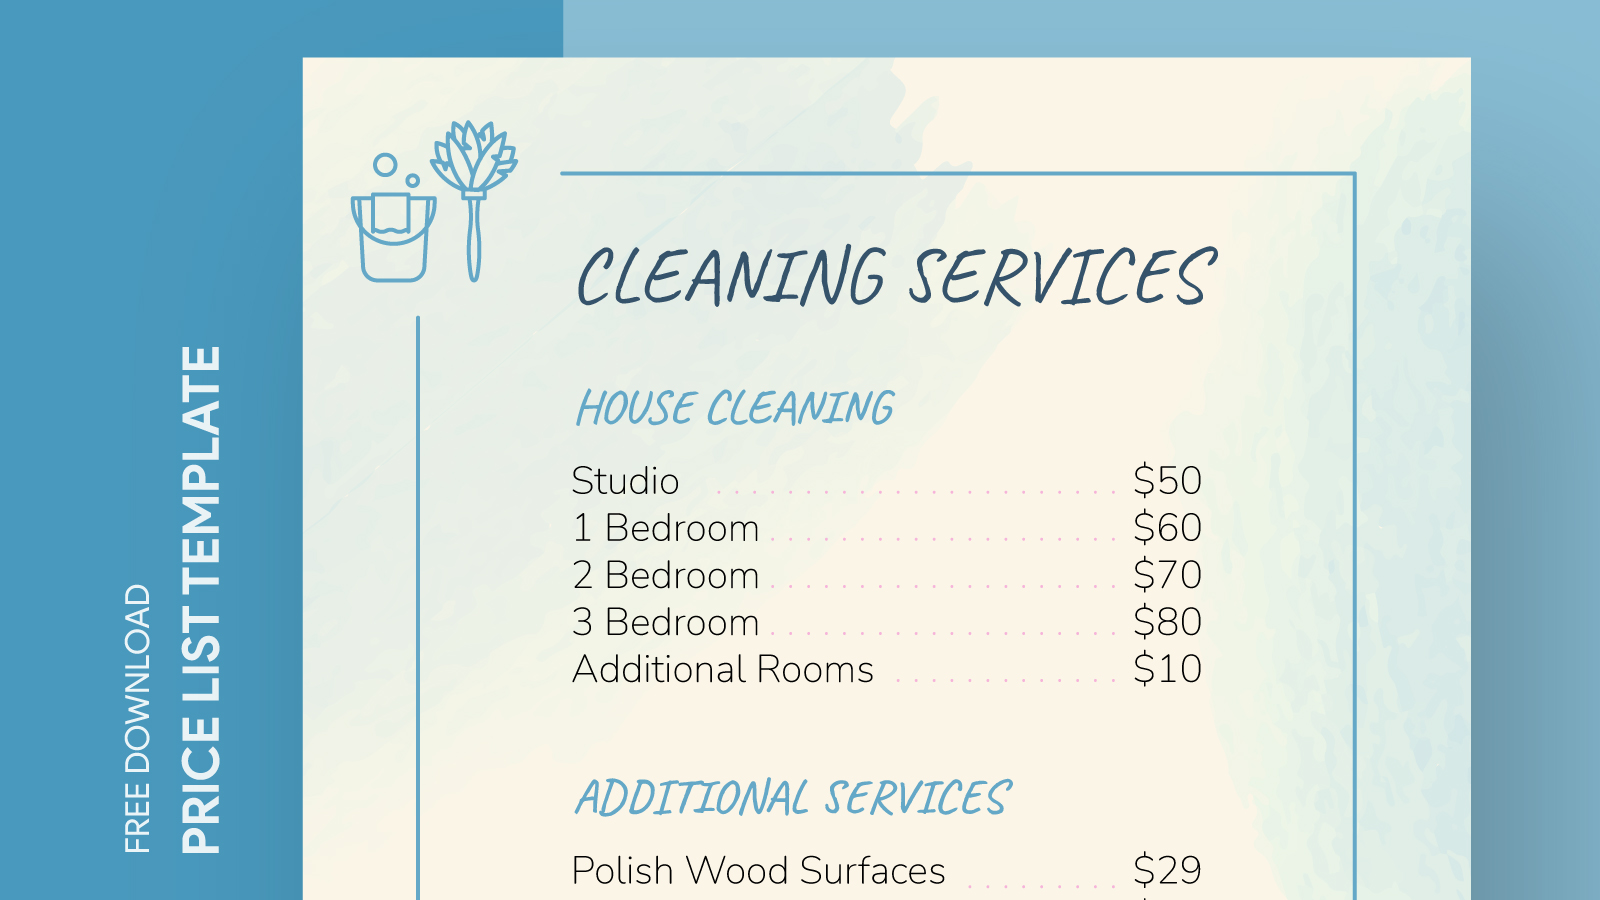 House Cleaning Services Price List Template